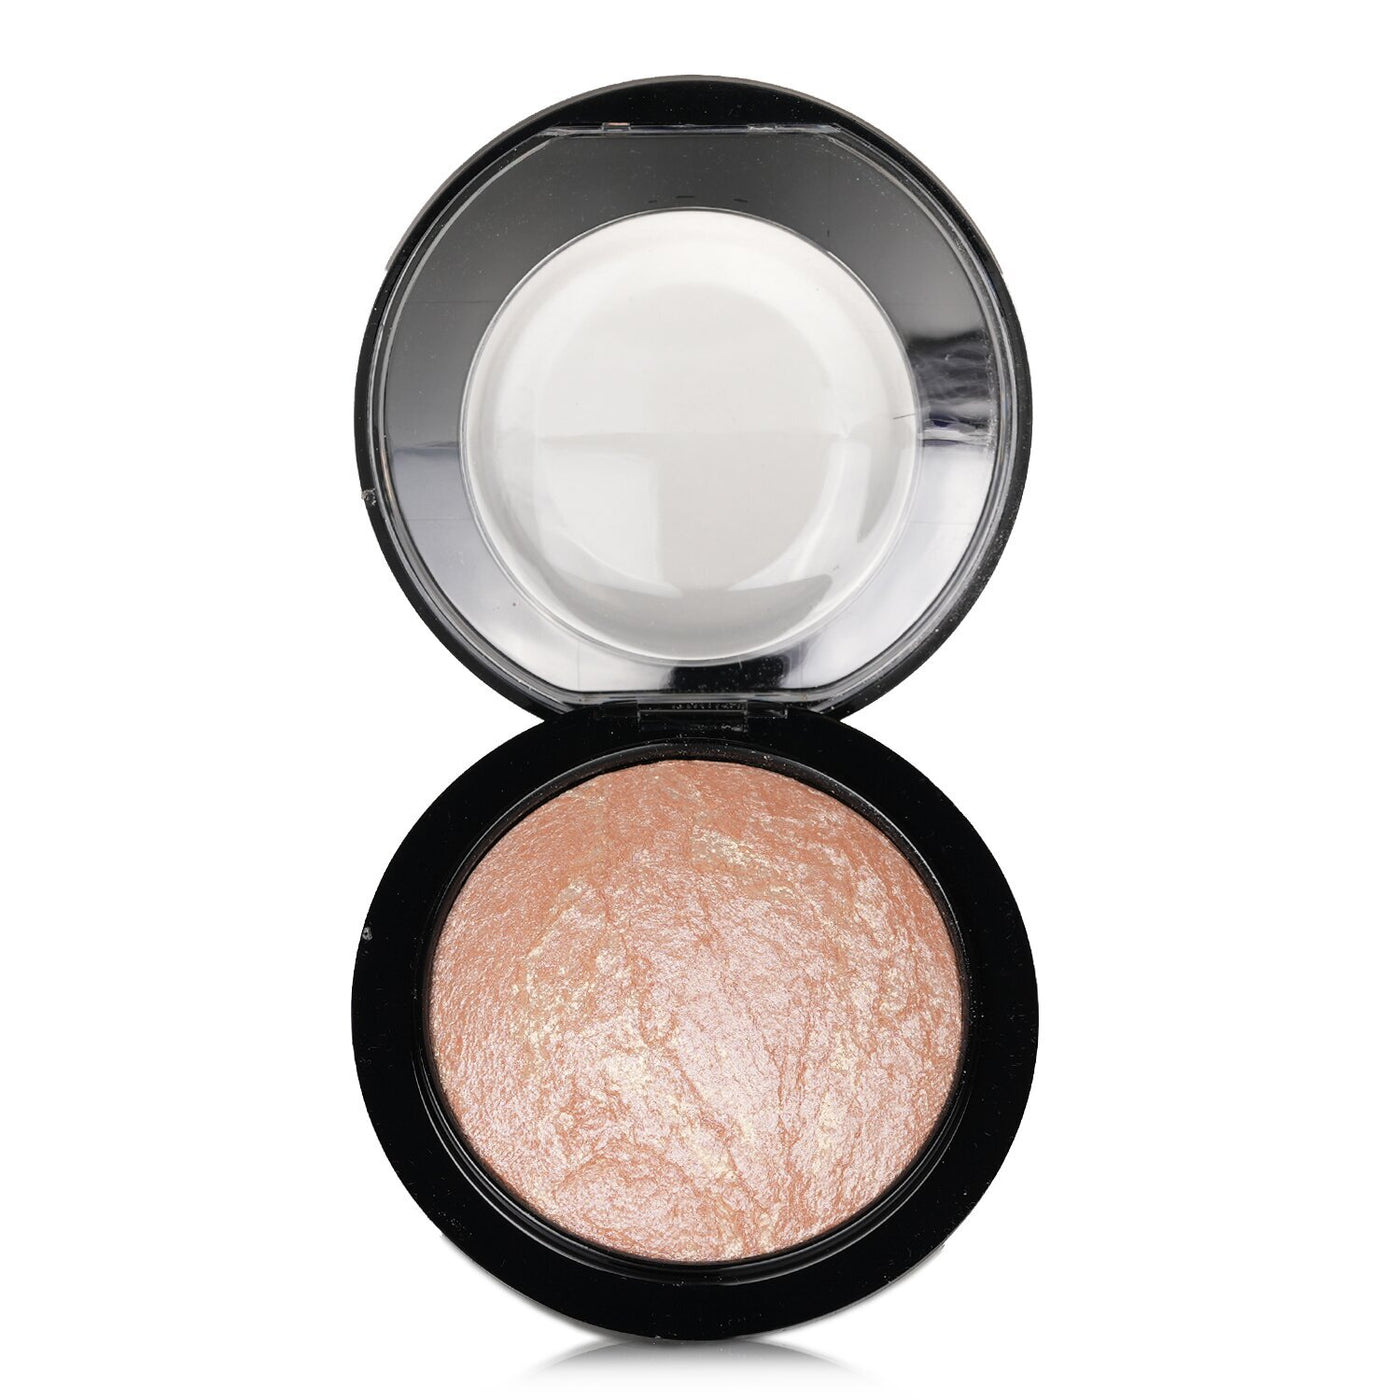 M·A·C MINERALIZE SKINFINISH Face Powder 10g - Soft & Gentle Gilded Peach Bronze